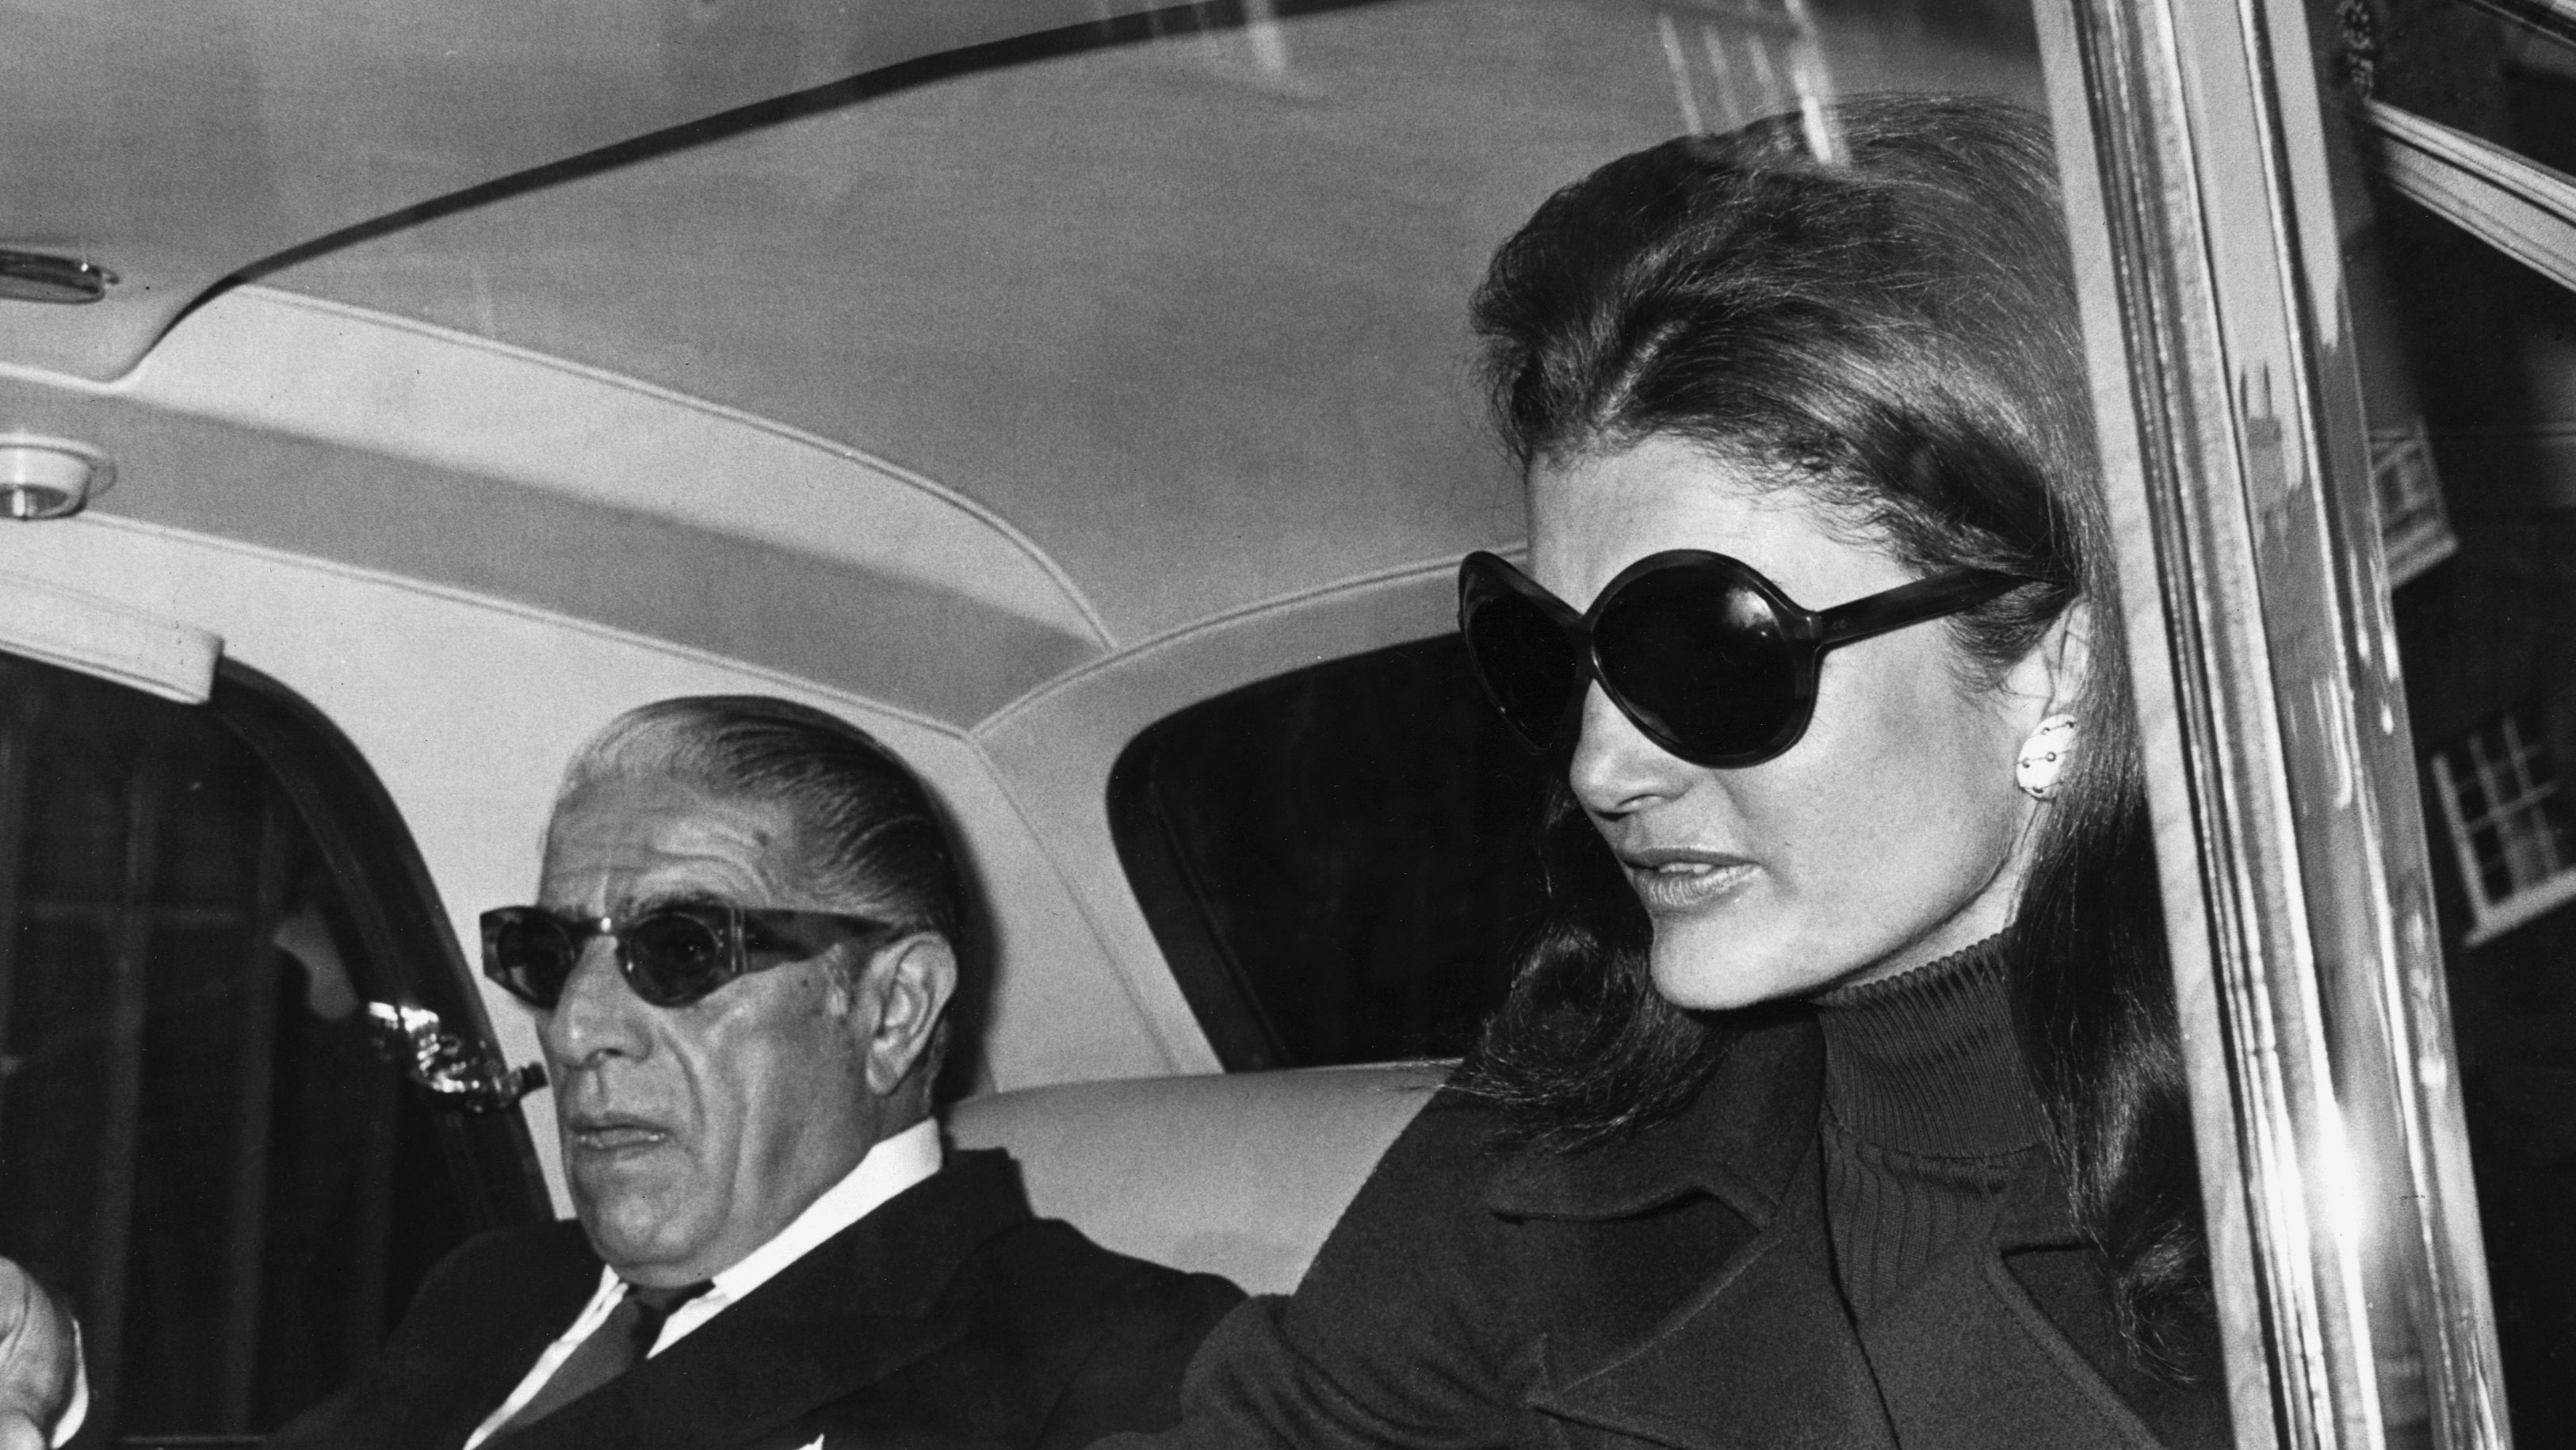 Jacqueline Sex Vido - How Jackie Kennedy's Second Marriage Forever Changed Media and Porn -  InsideHook